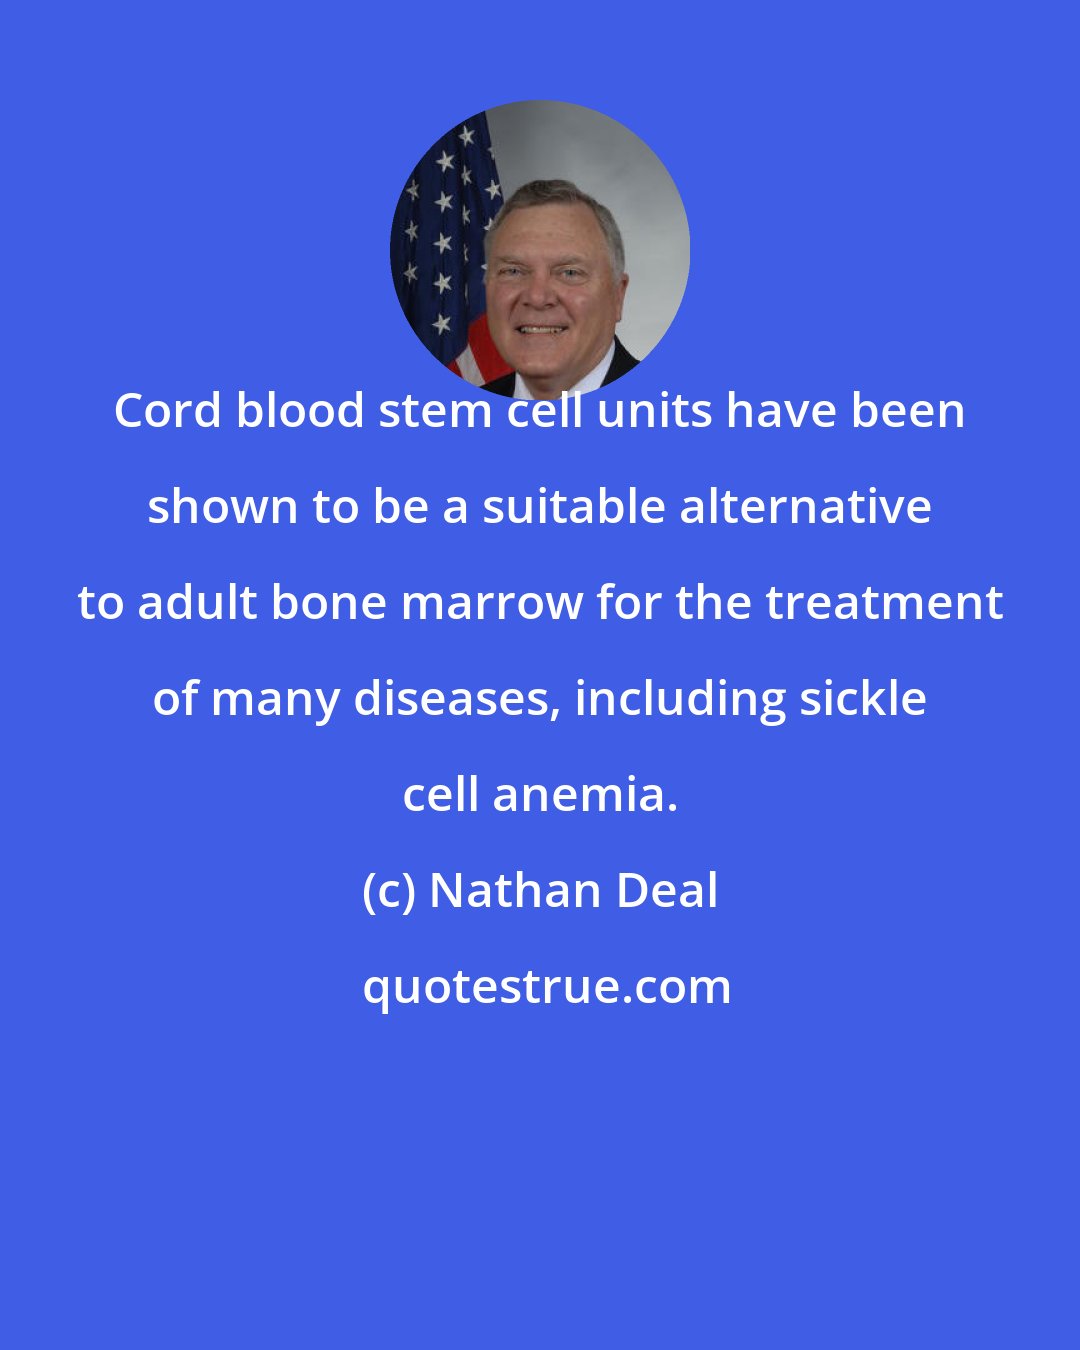 Nathan Deal: Cord blood stem cell units have been shown to be a suitable alternative to adult bone marrow for the treatment of many diseases, including sickle cell anemia.